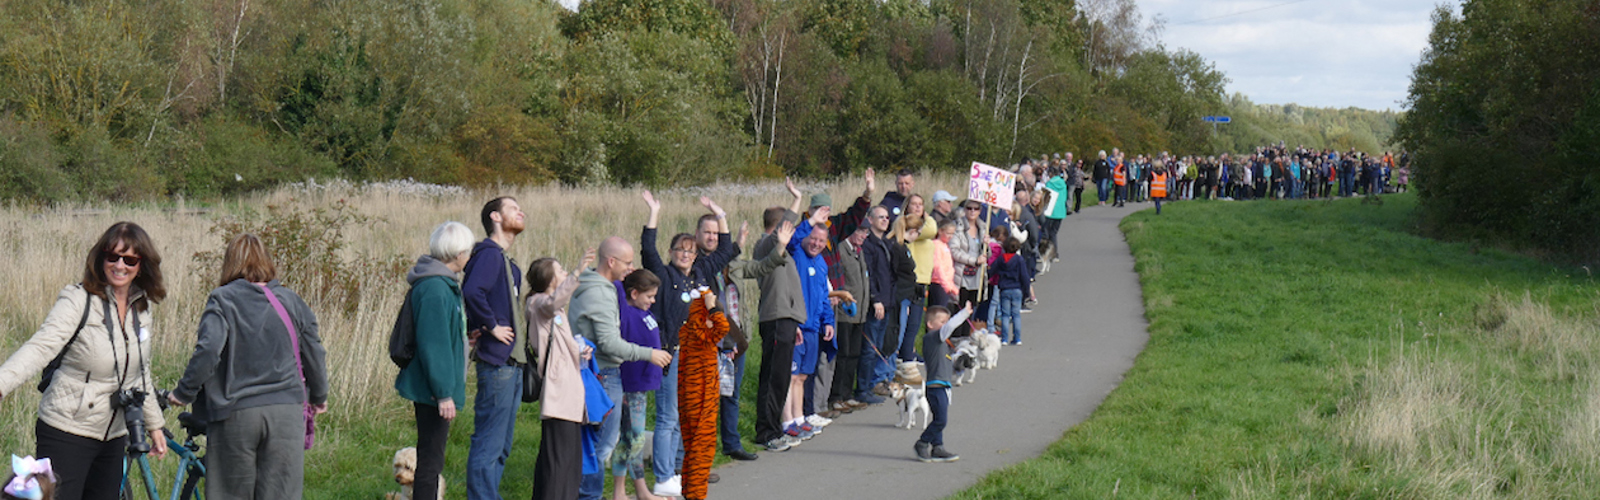 Environmental activists at Rimrose Valley in Liverpool (A5036) make a long line down a path